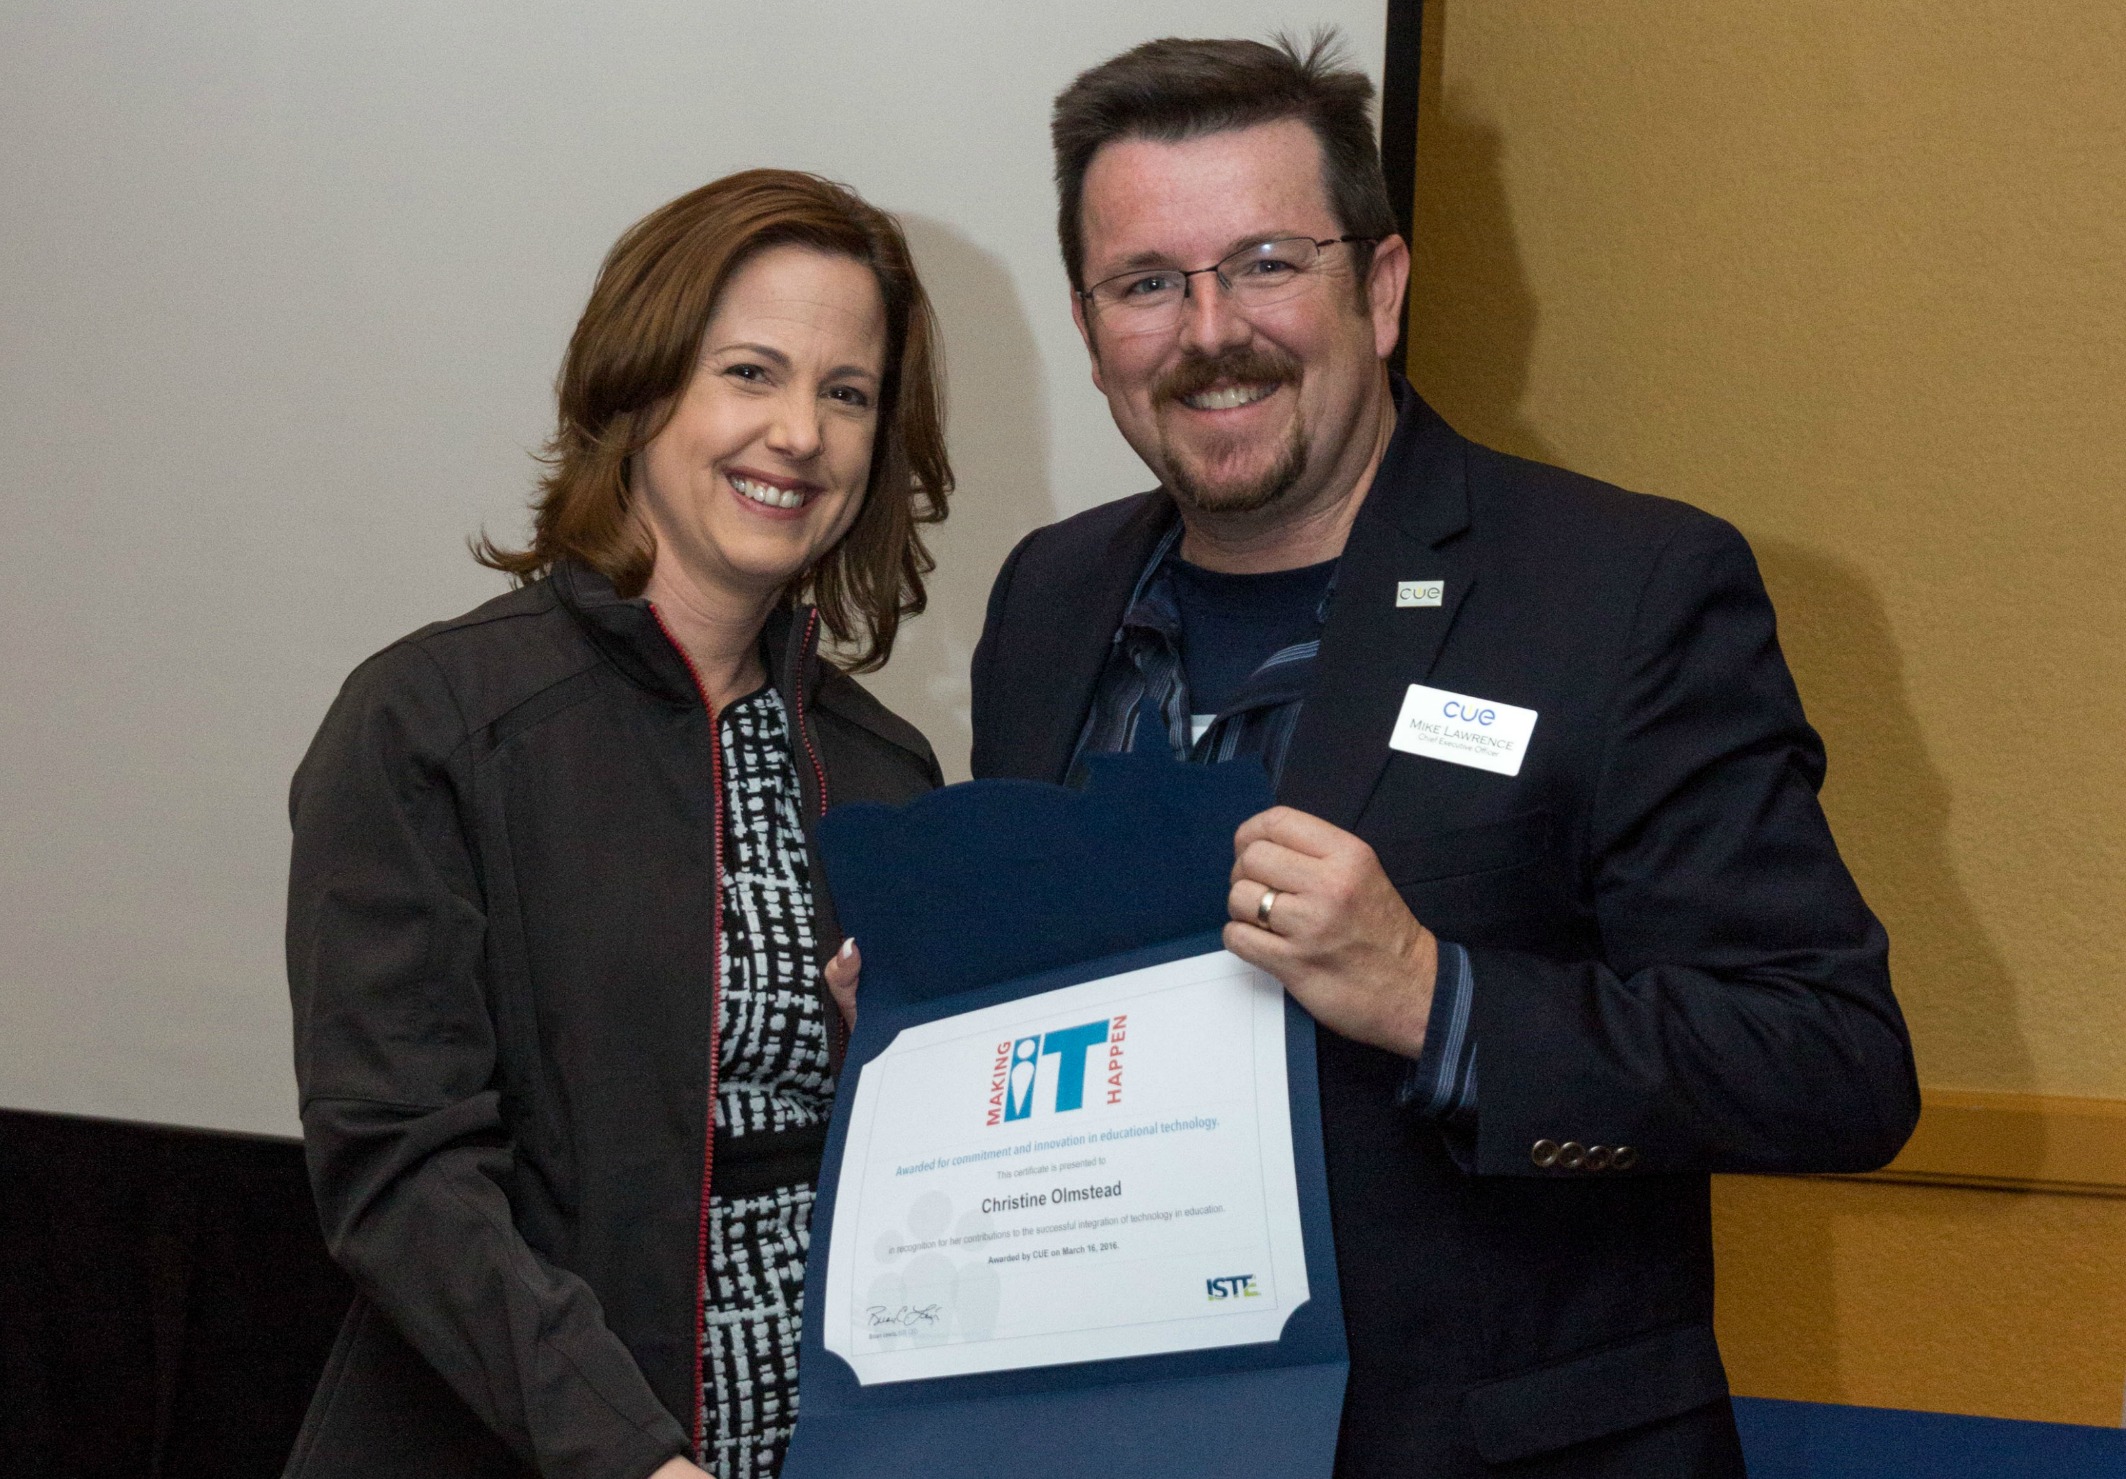 An image of OCDE Assistant Superintendent receiving the Making IT Happen award